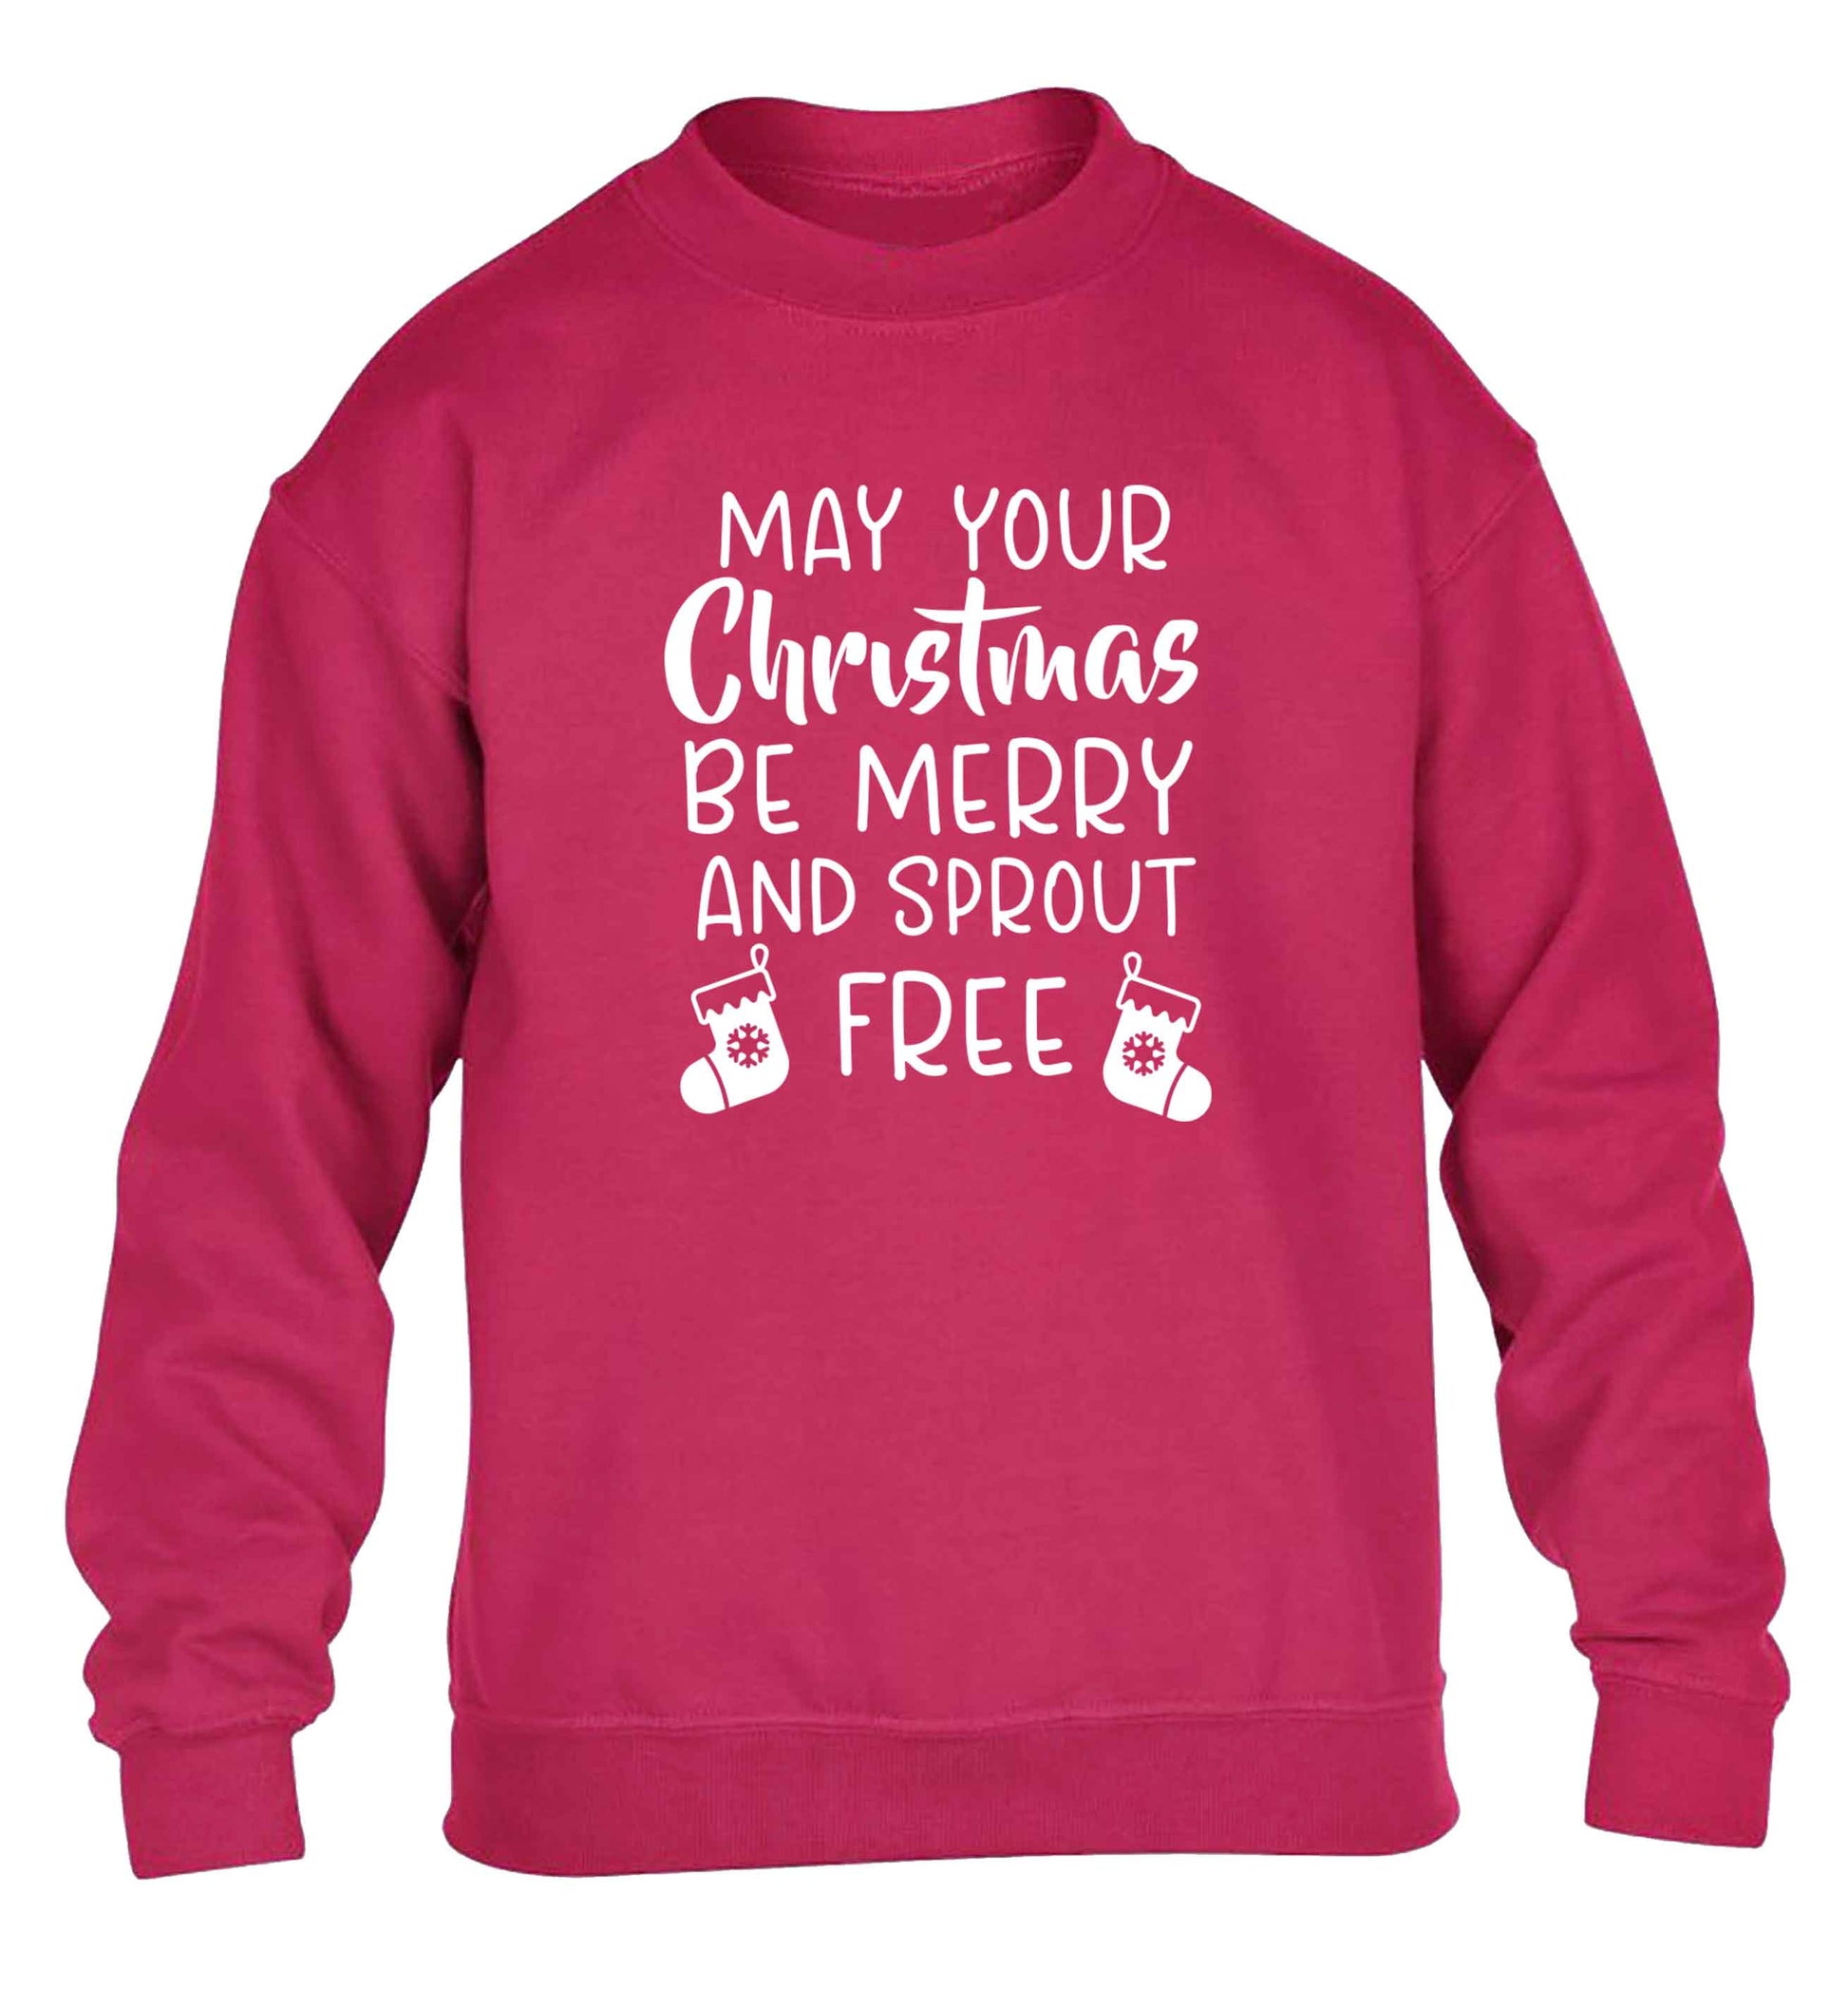 May your Christmas be merry and sprout free children's pink sweater 12-13 Years